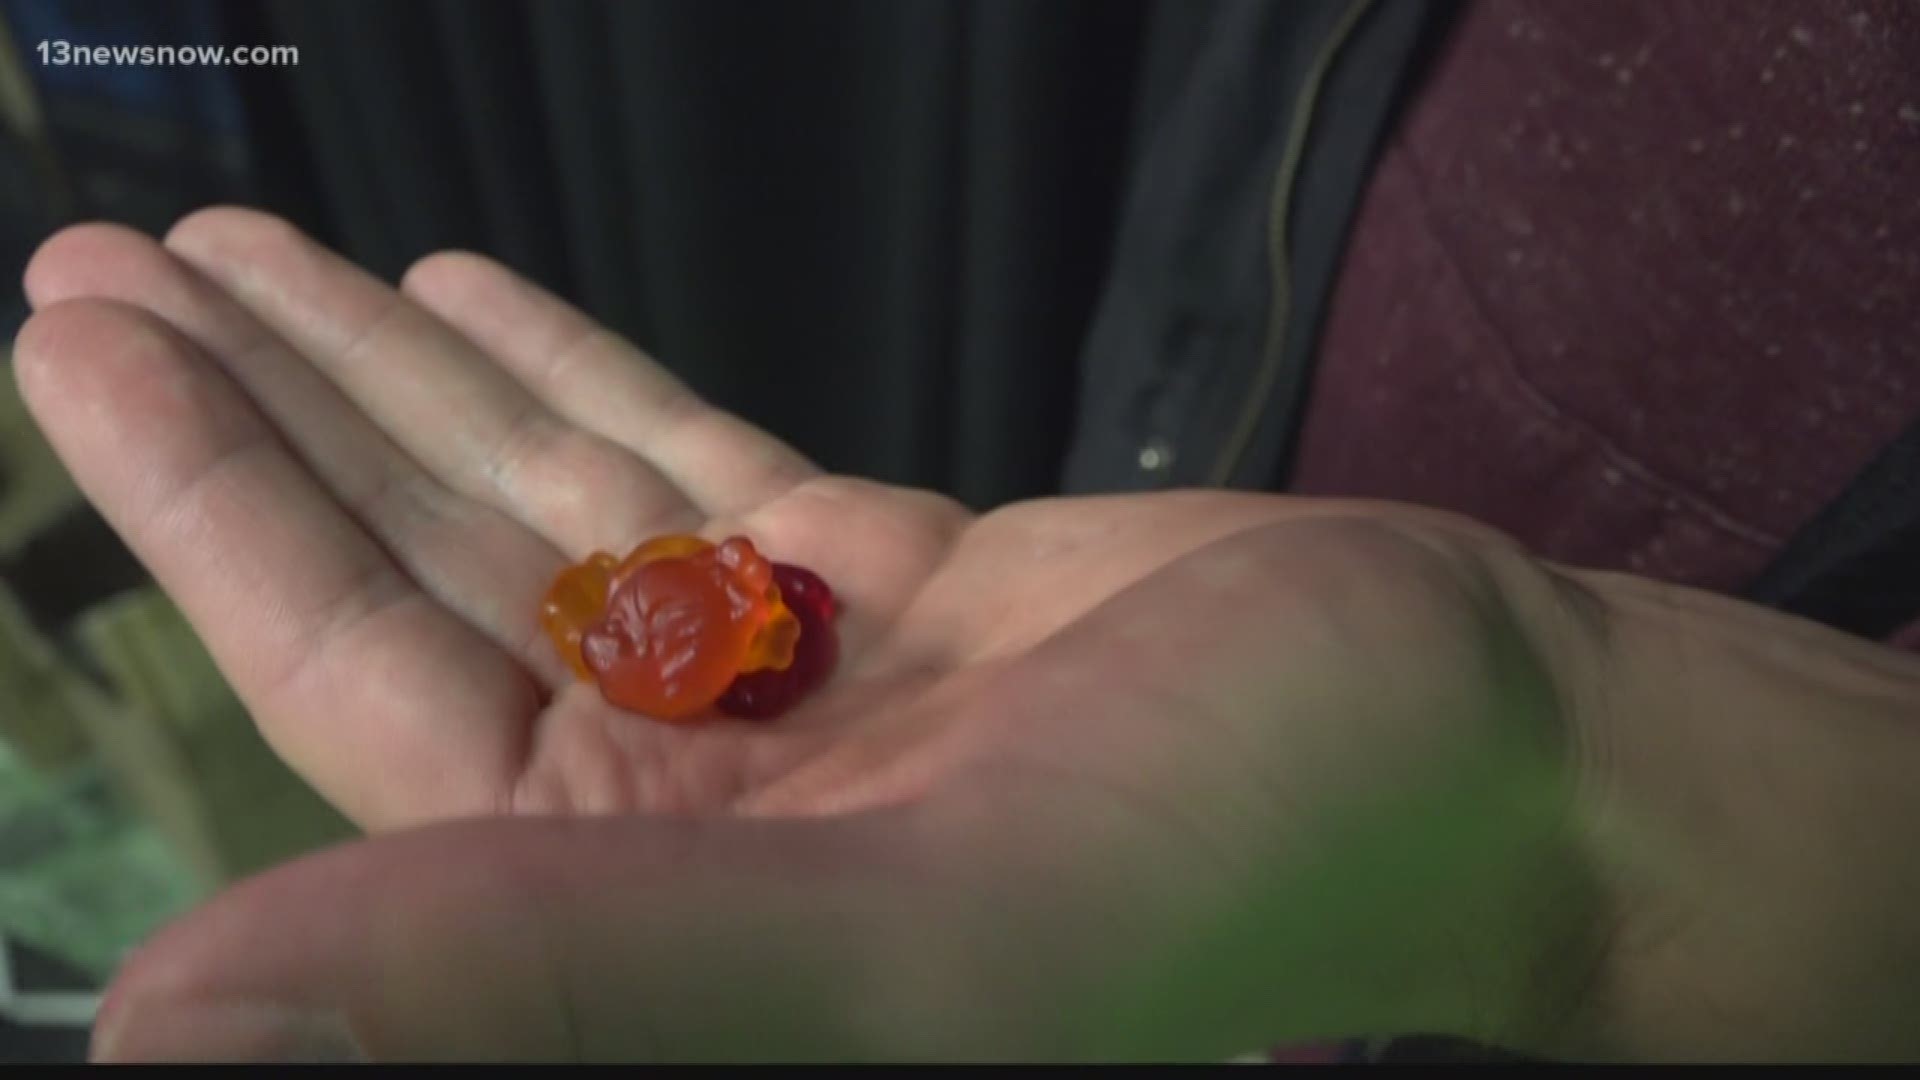 Have you been lured in by the gummy vitamin craze?